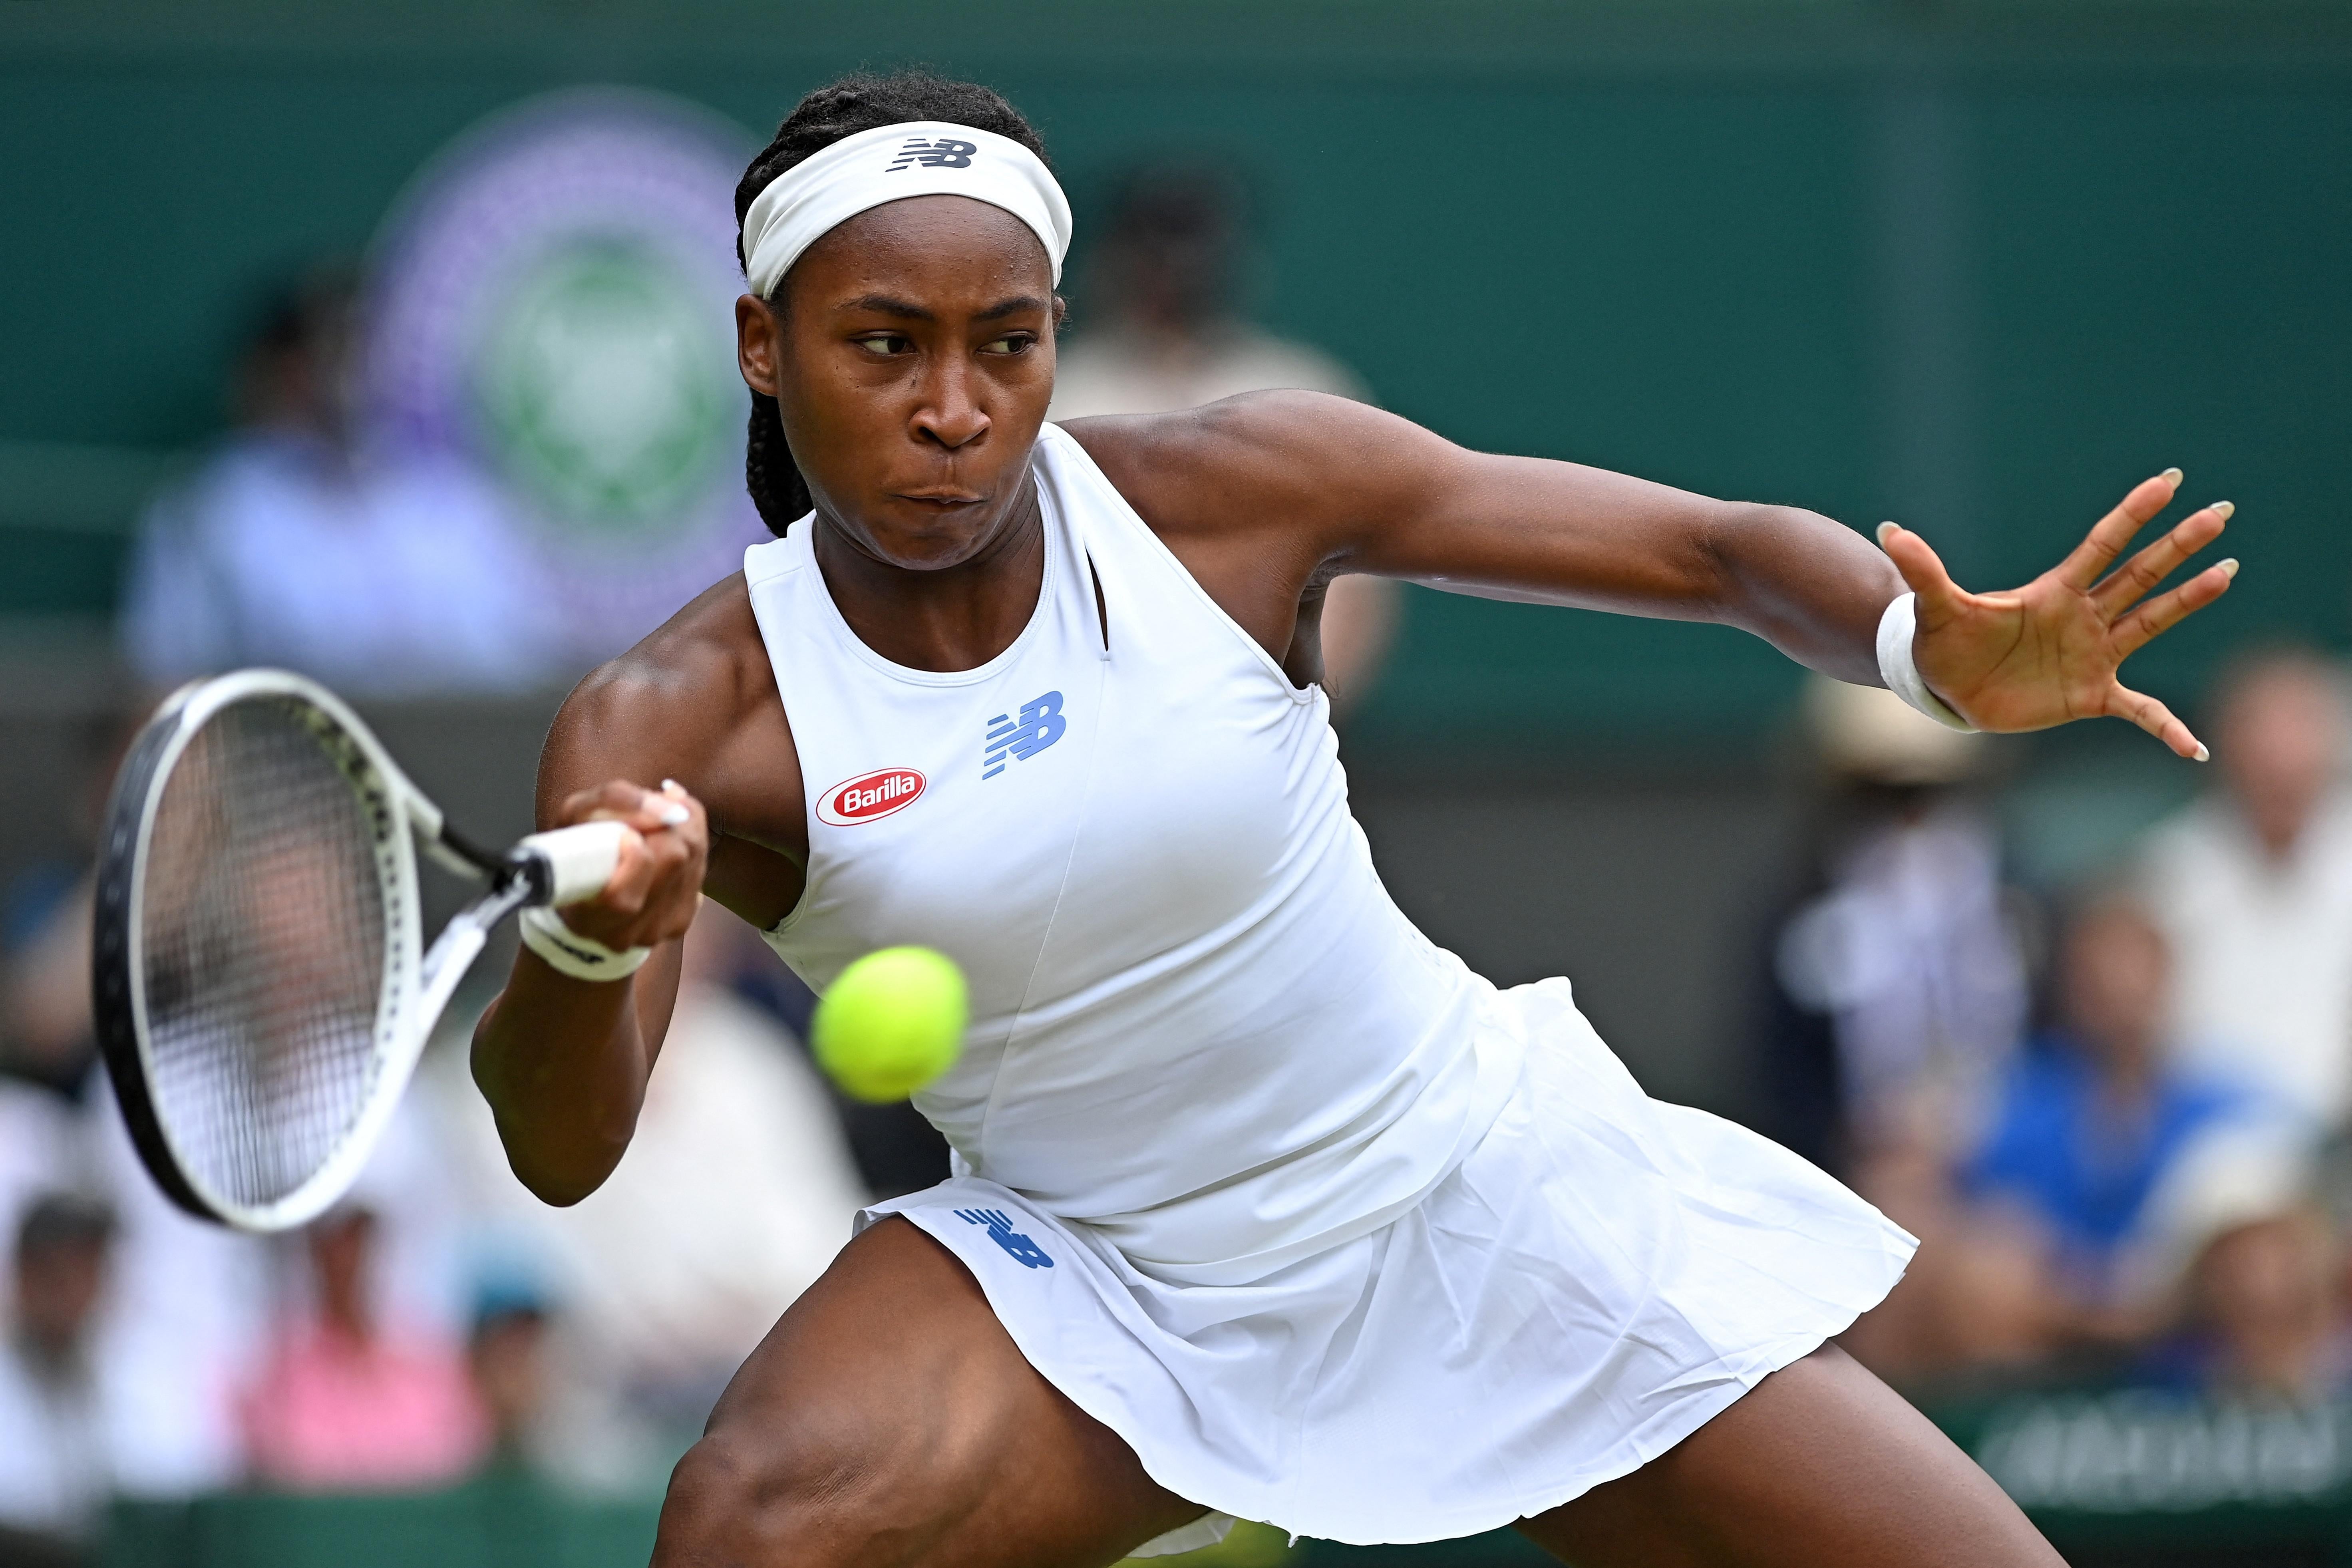 U.S. player Coco Gauff returns against Germany's Angelique Kerber during their women's singles fourth round match on the seventh day of the 2021 Wimbledon Championships at The All England Tennis Club in Wimbledon, southwest London, on July 5, 2021.